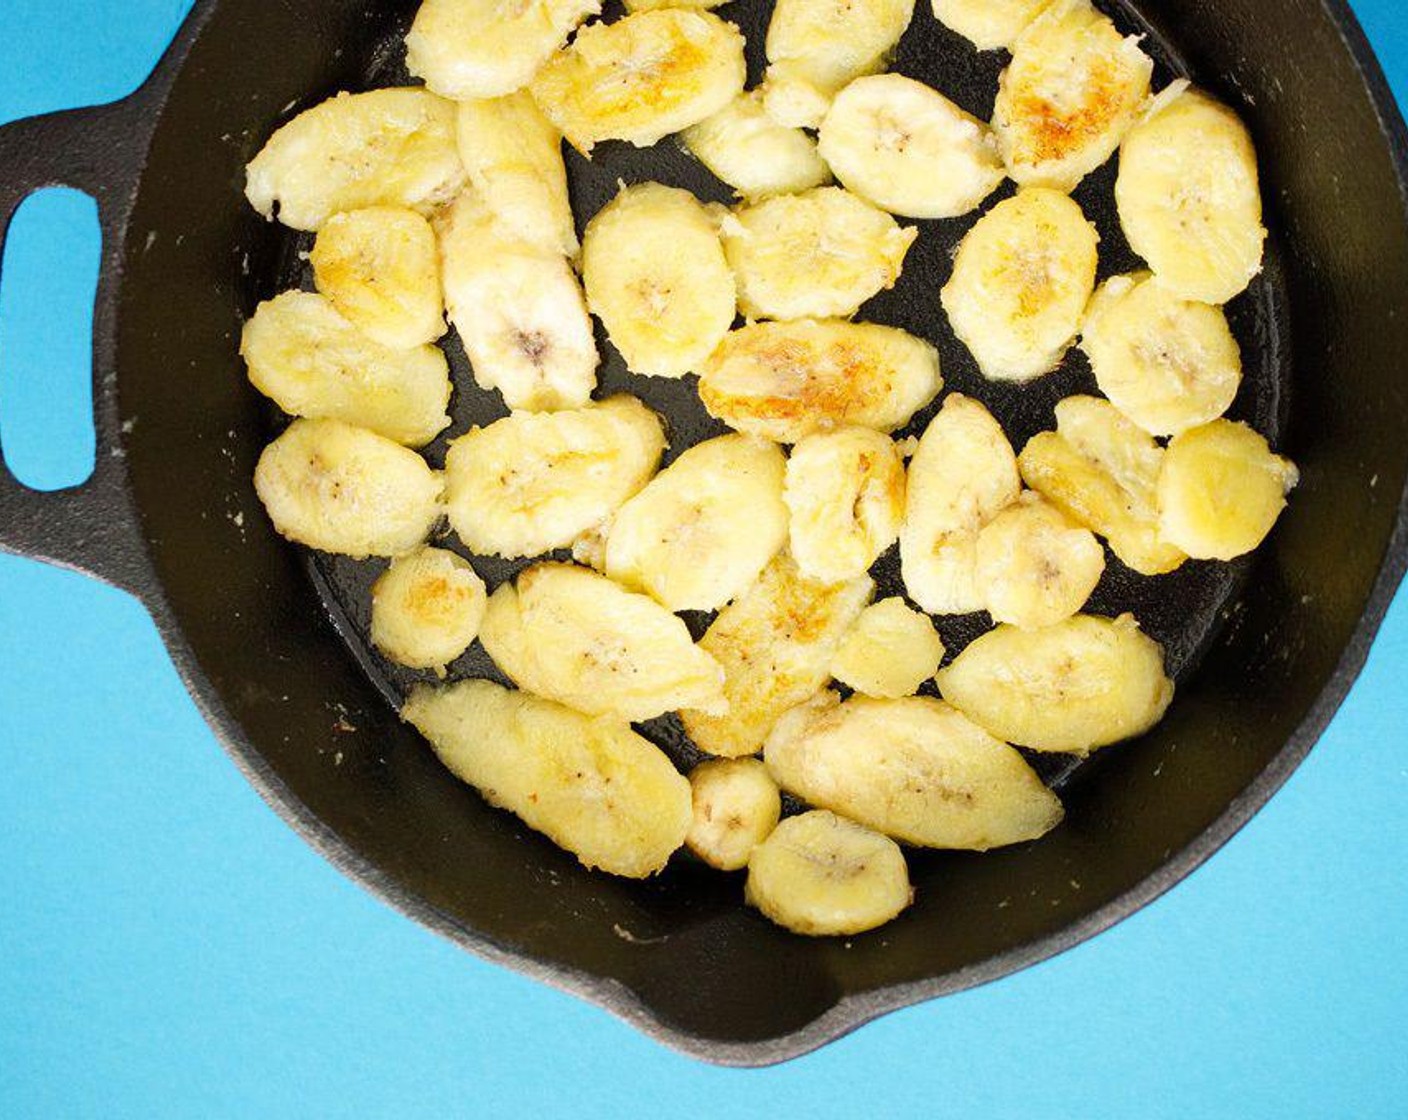 step 1 Heat Butter (1 Tbsp) over medium high heat in a cast iron skillet (if possible) or large frying pan. Add Bananas (3) and cook about three minutes on each side, until bananas begin to brown and caramelize. Remove from heat.